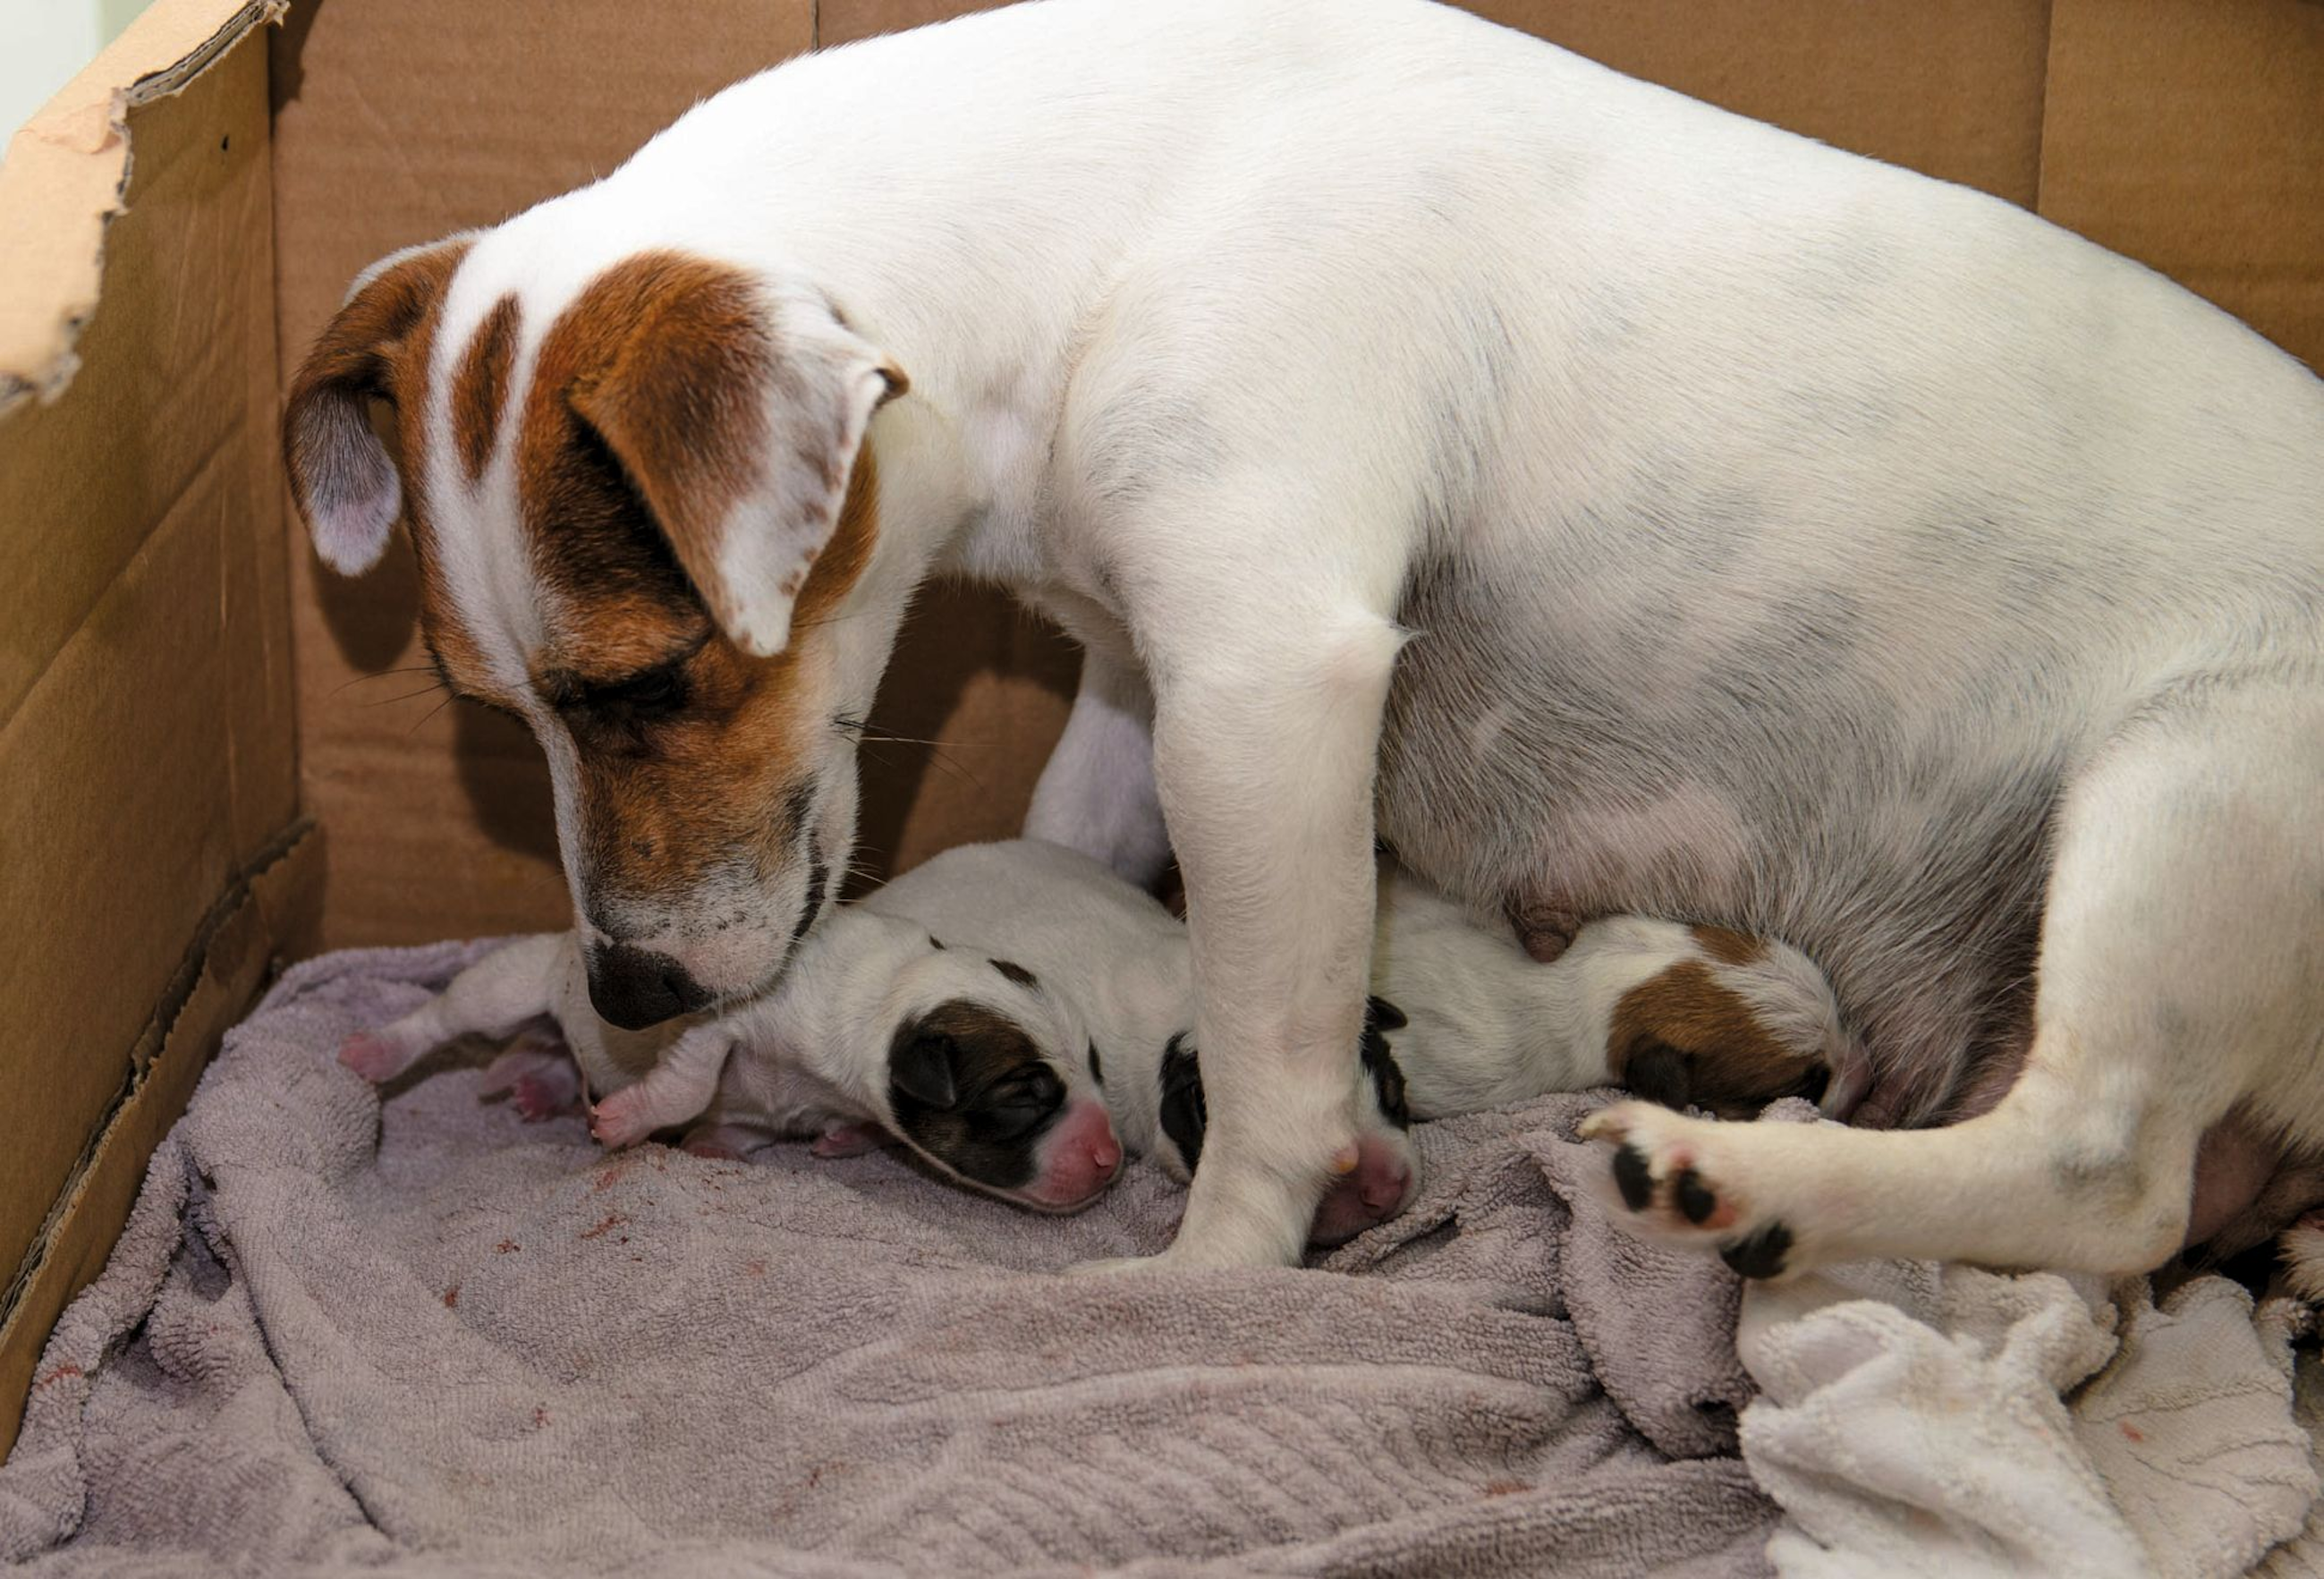 A bitch will remain with her puppies almost constantly in the first few days postpartum